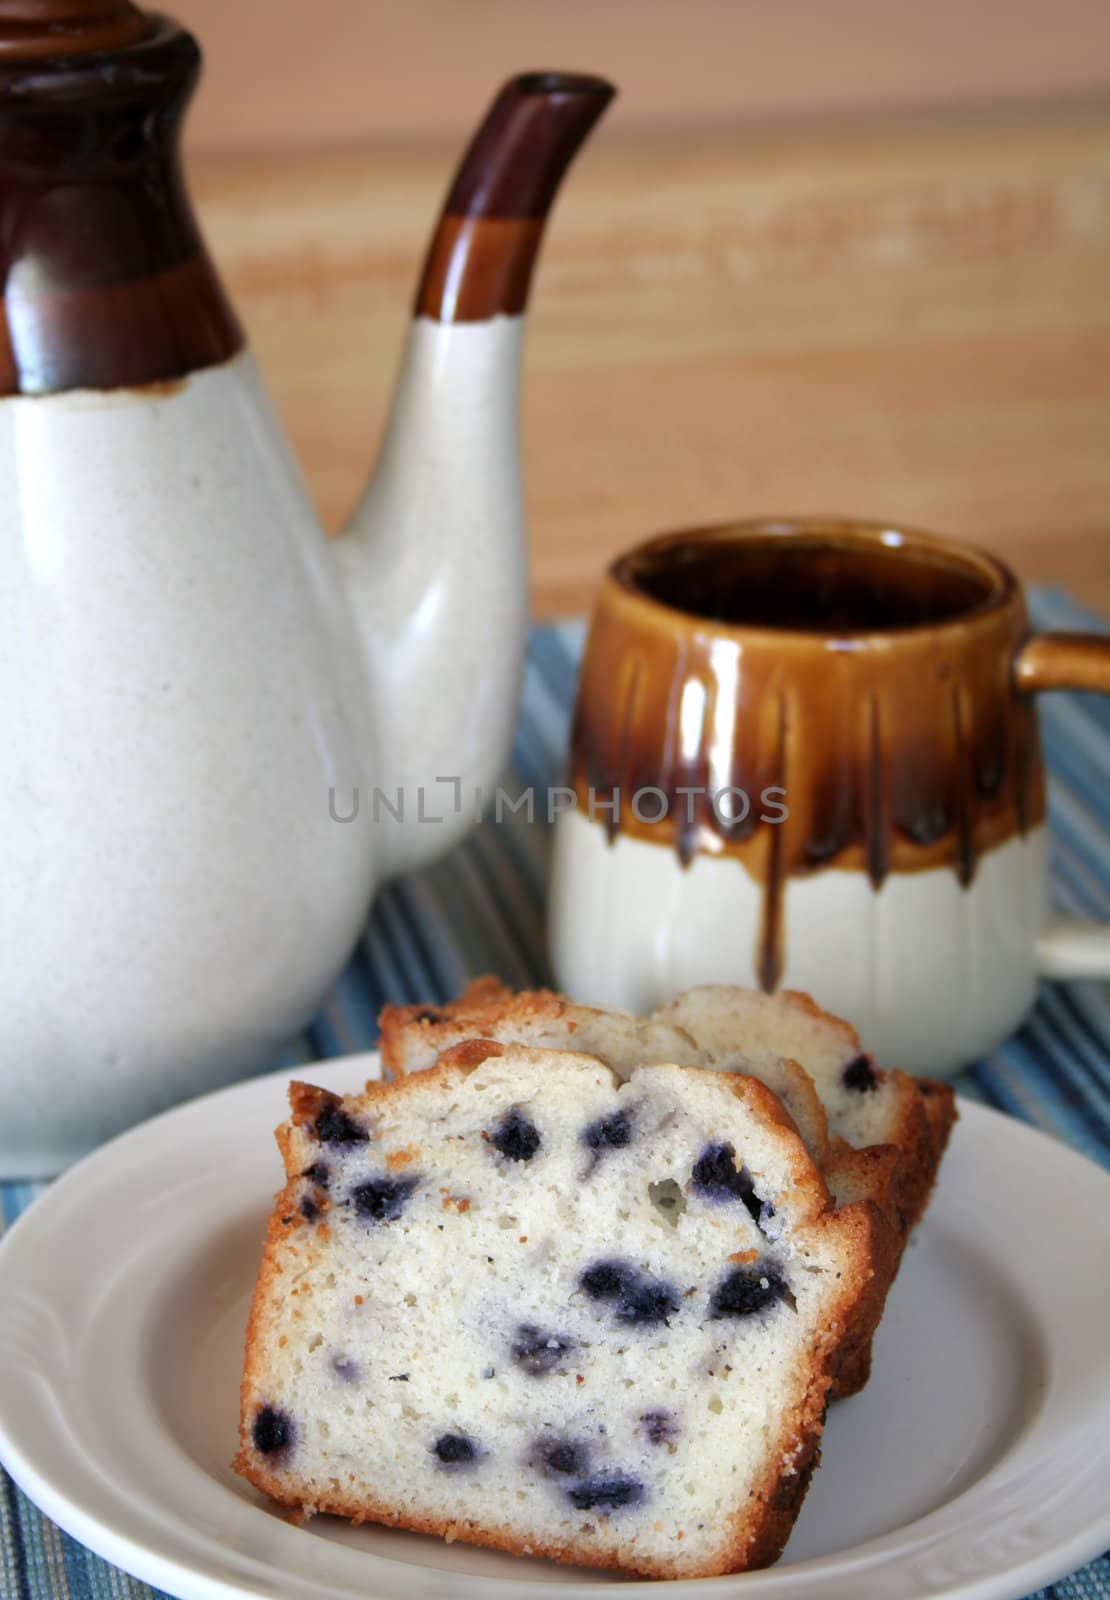 plate of blueberry cake with coffee cup and coffee pot.
